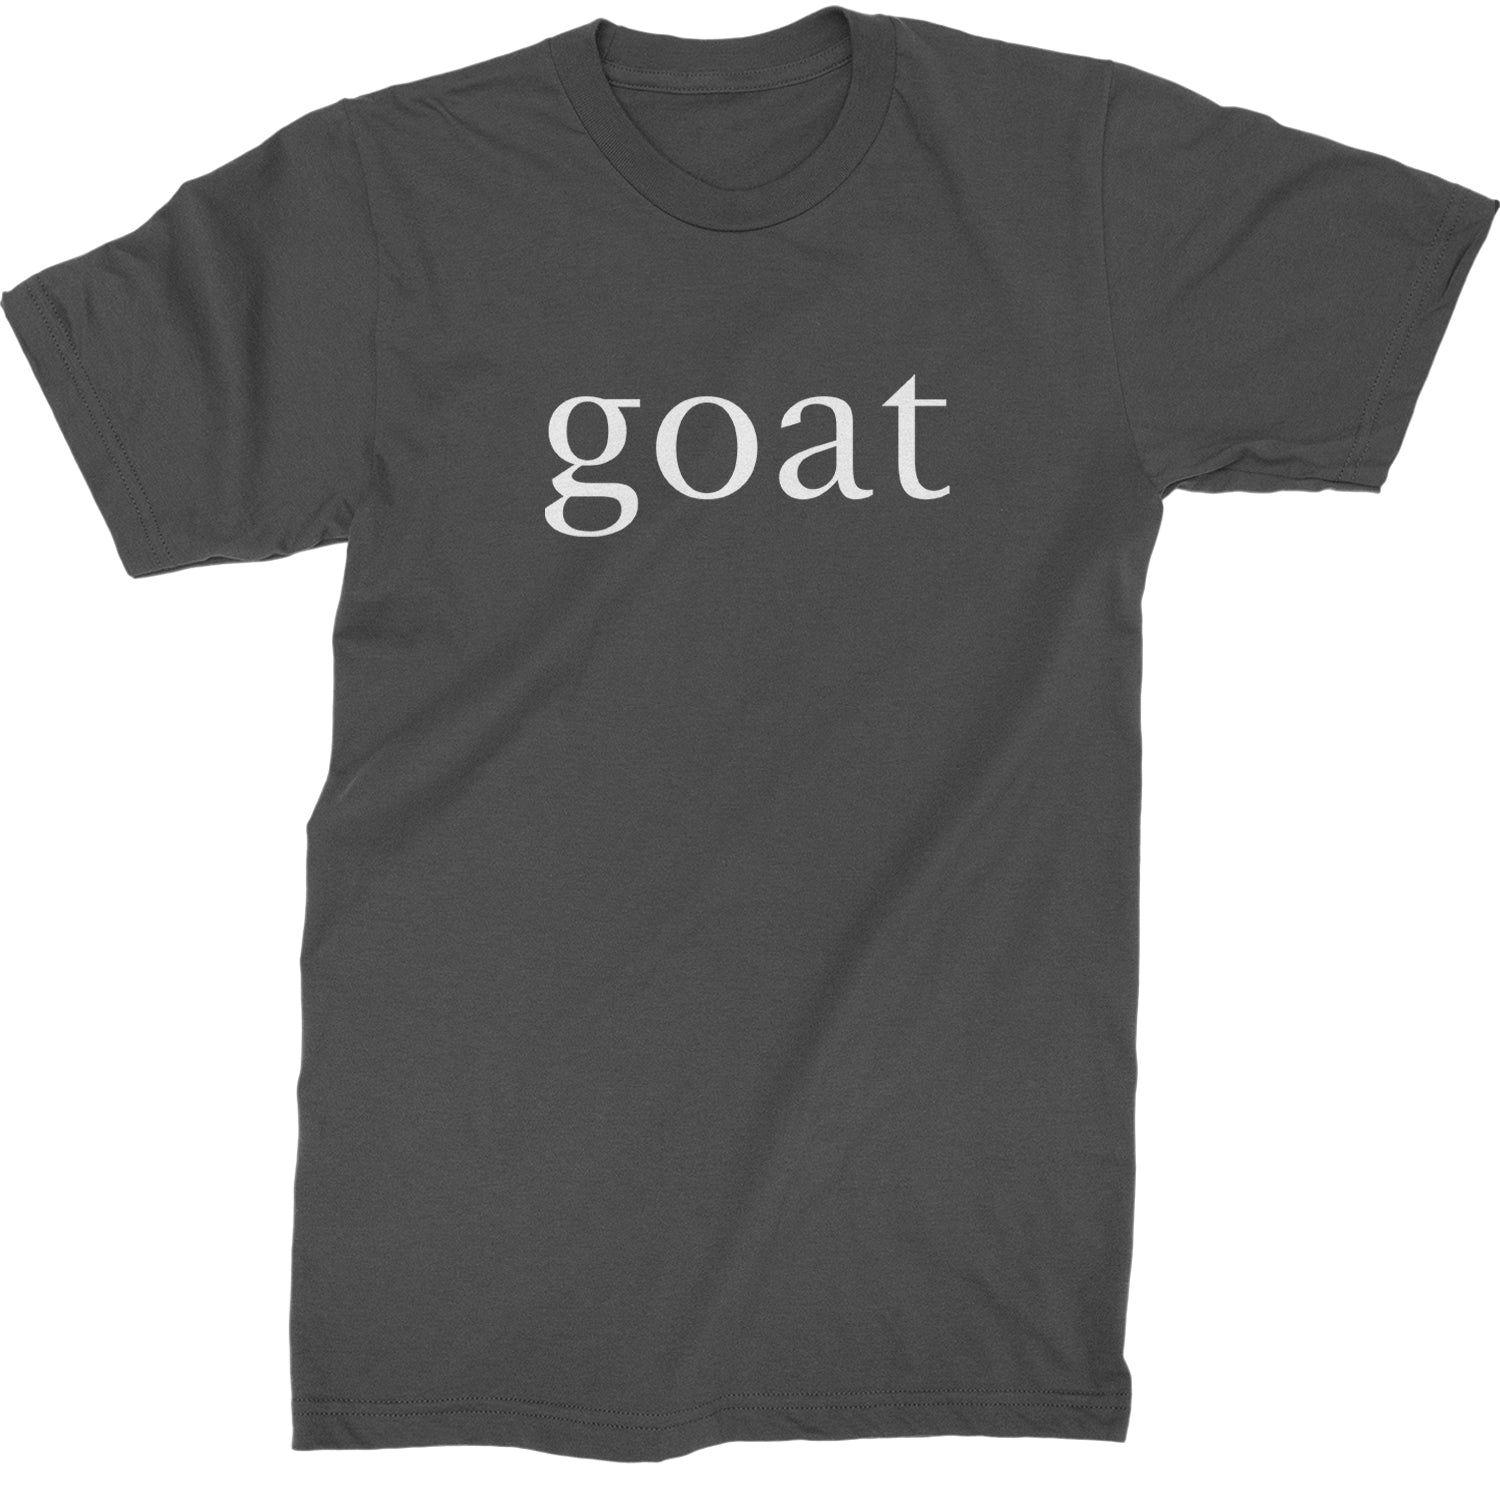 GOAT - Greatest Of All Time  Mens T-shirt Charcoal Grey